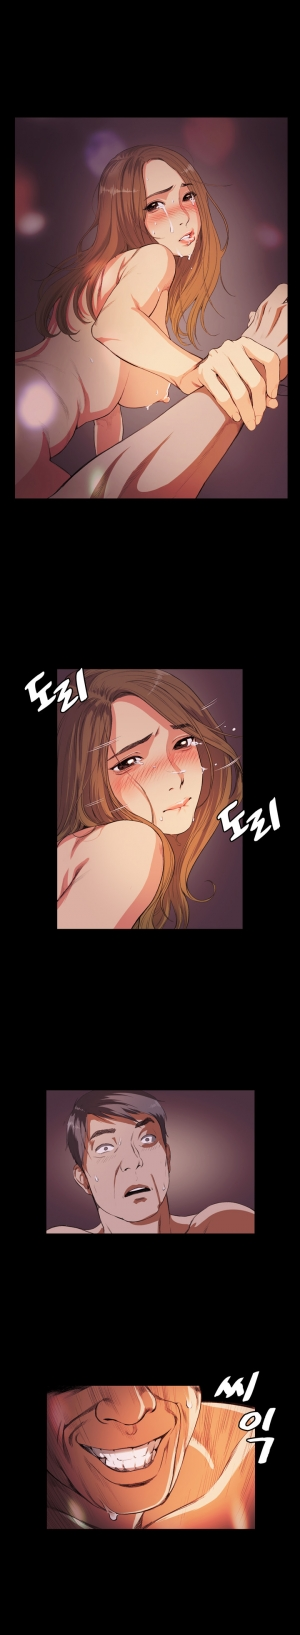  By Chance (Ep. 1-30)  [English] - Page 251